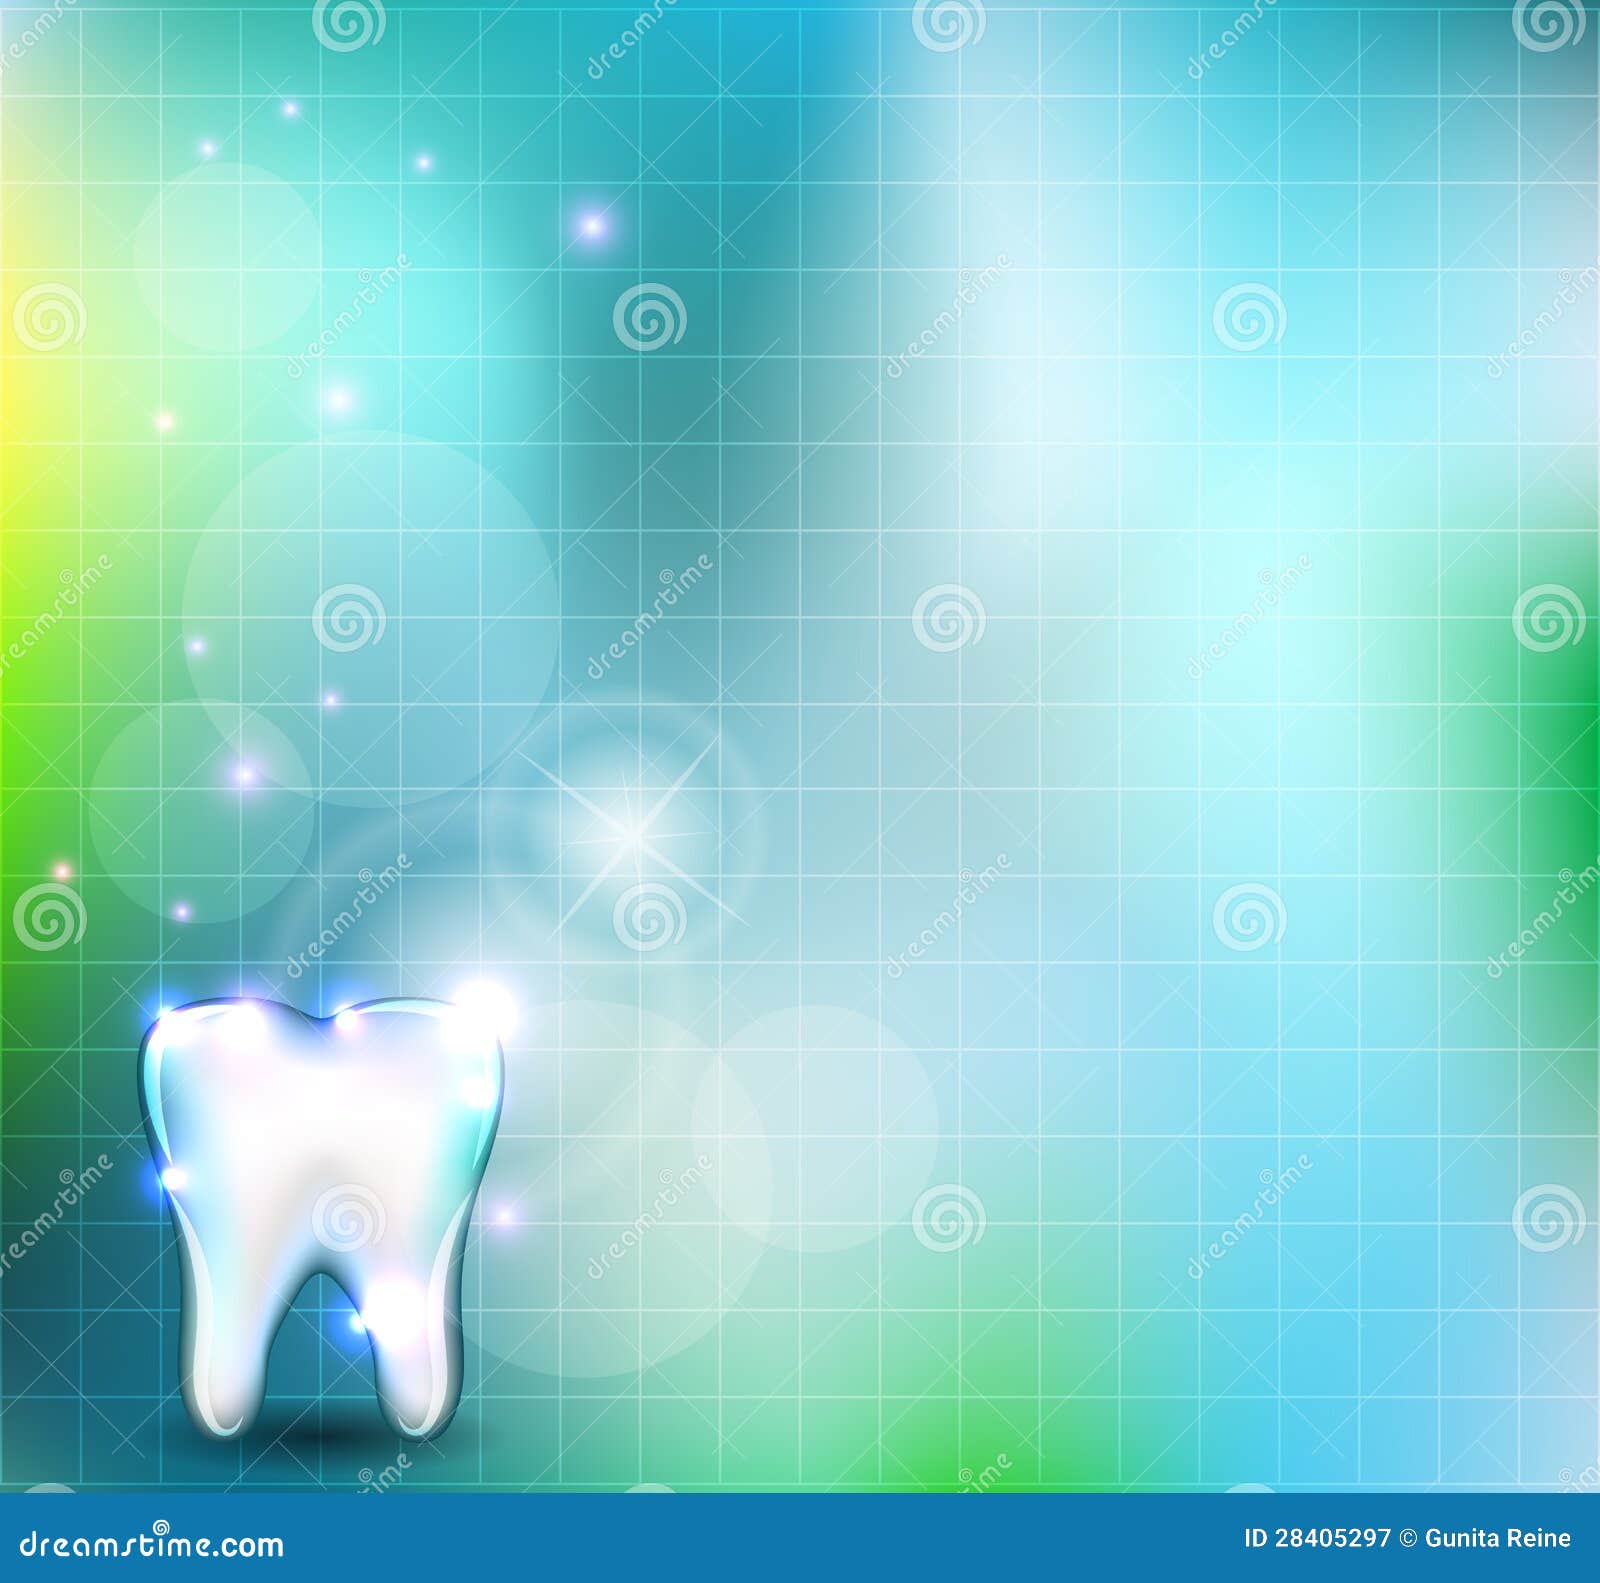 tooth clipart no background - photo #43